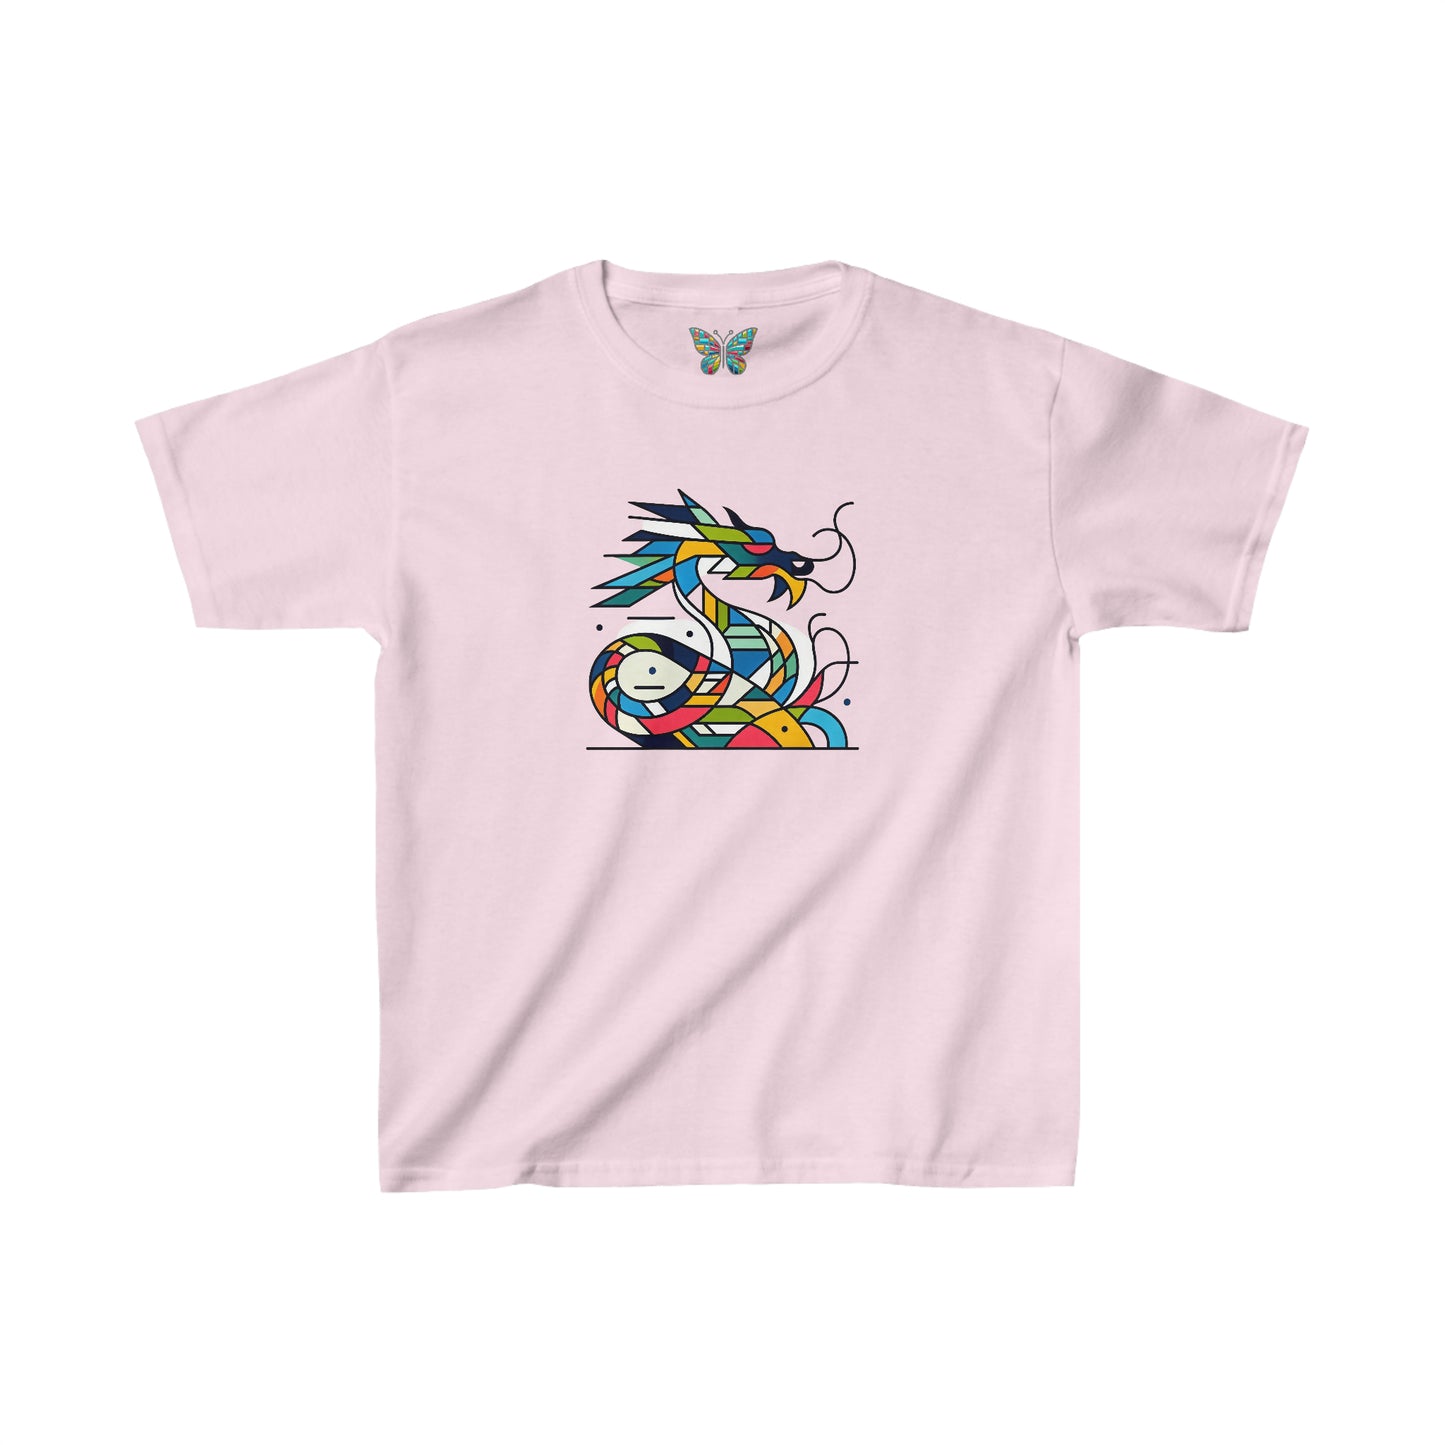 Dragon Serenergetic - Youth - Snazzle Tee